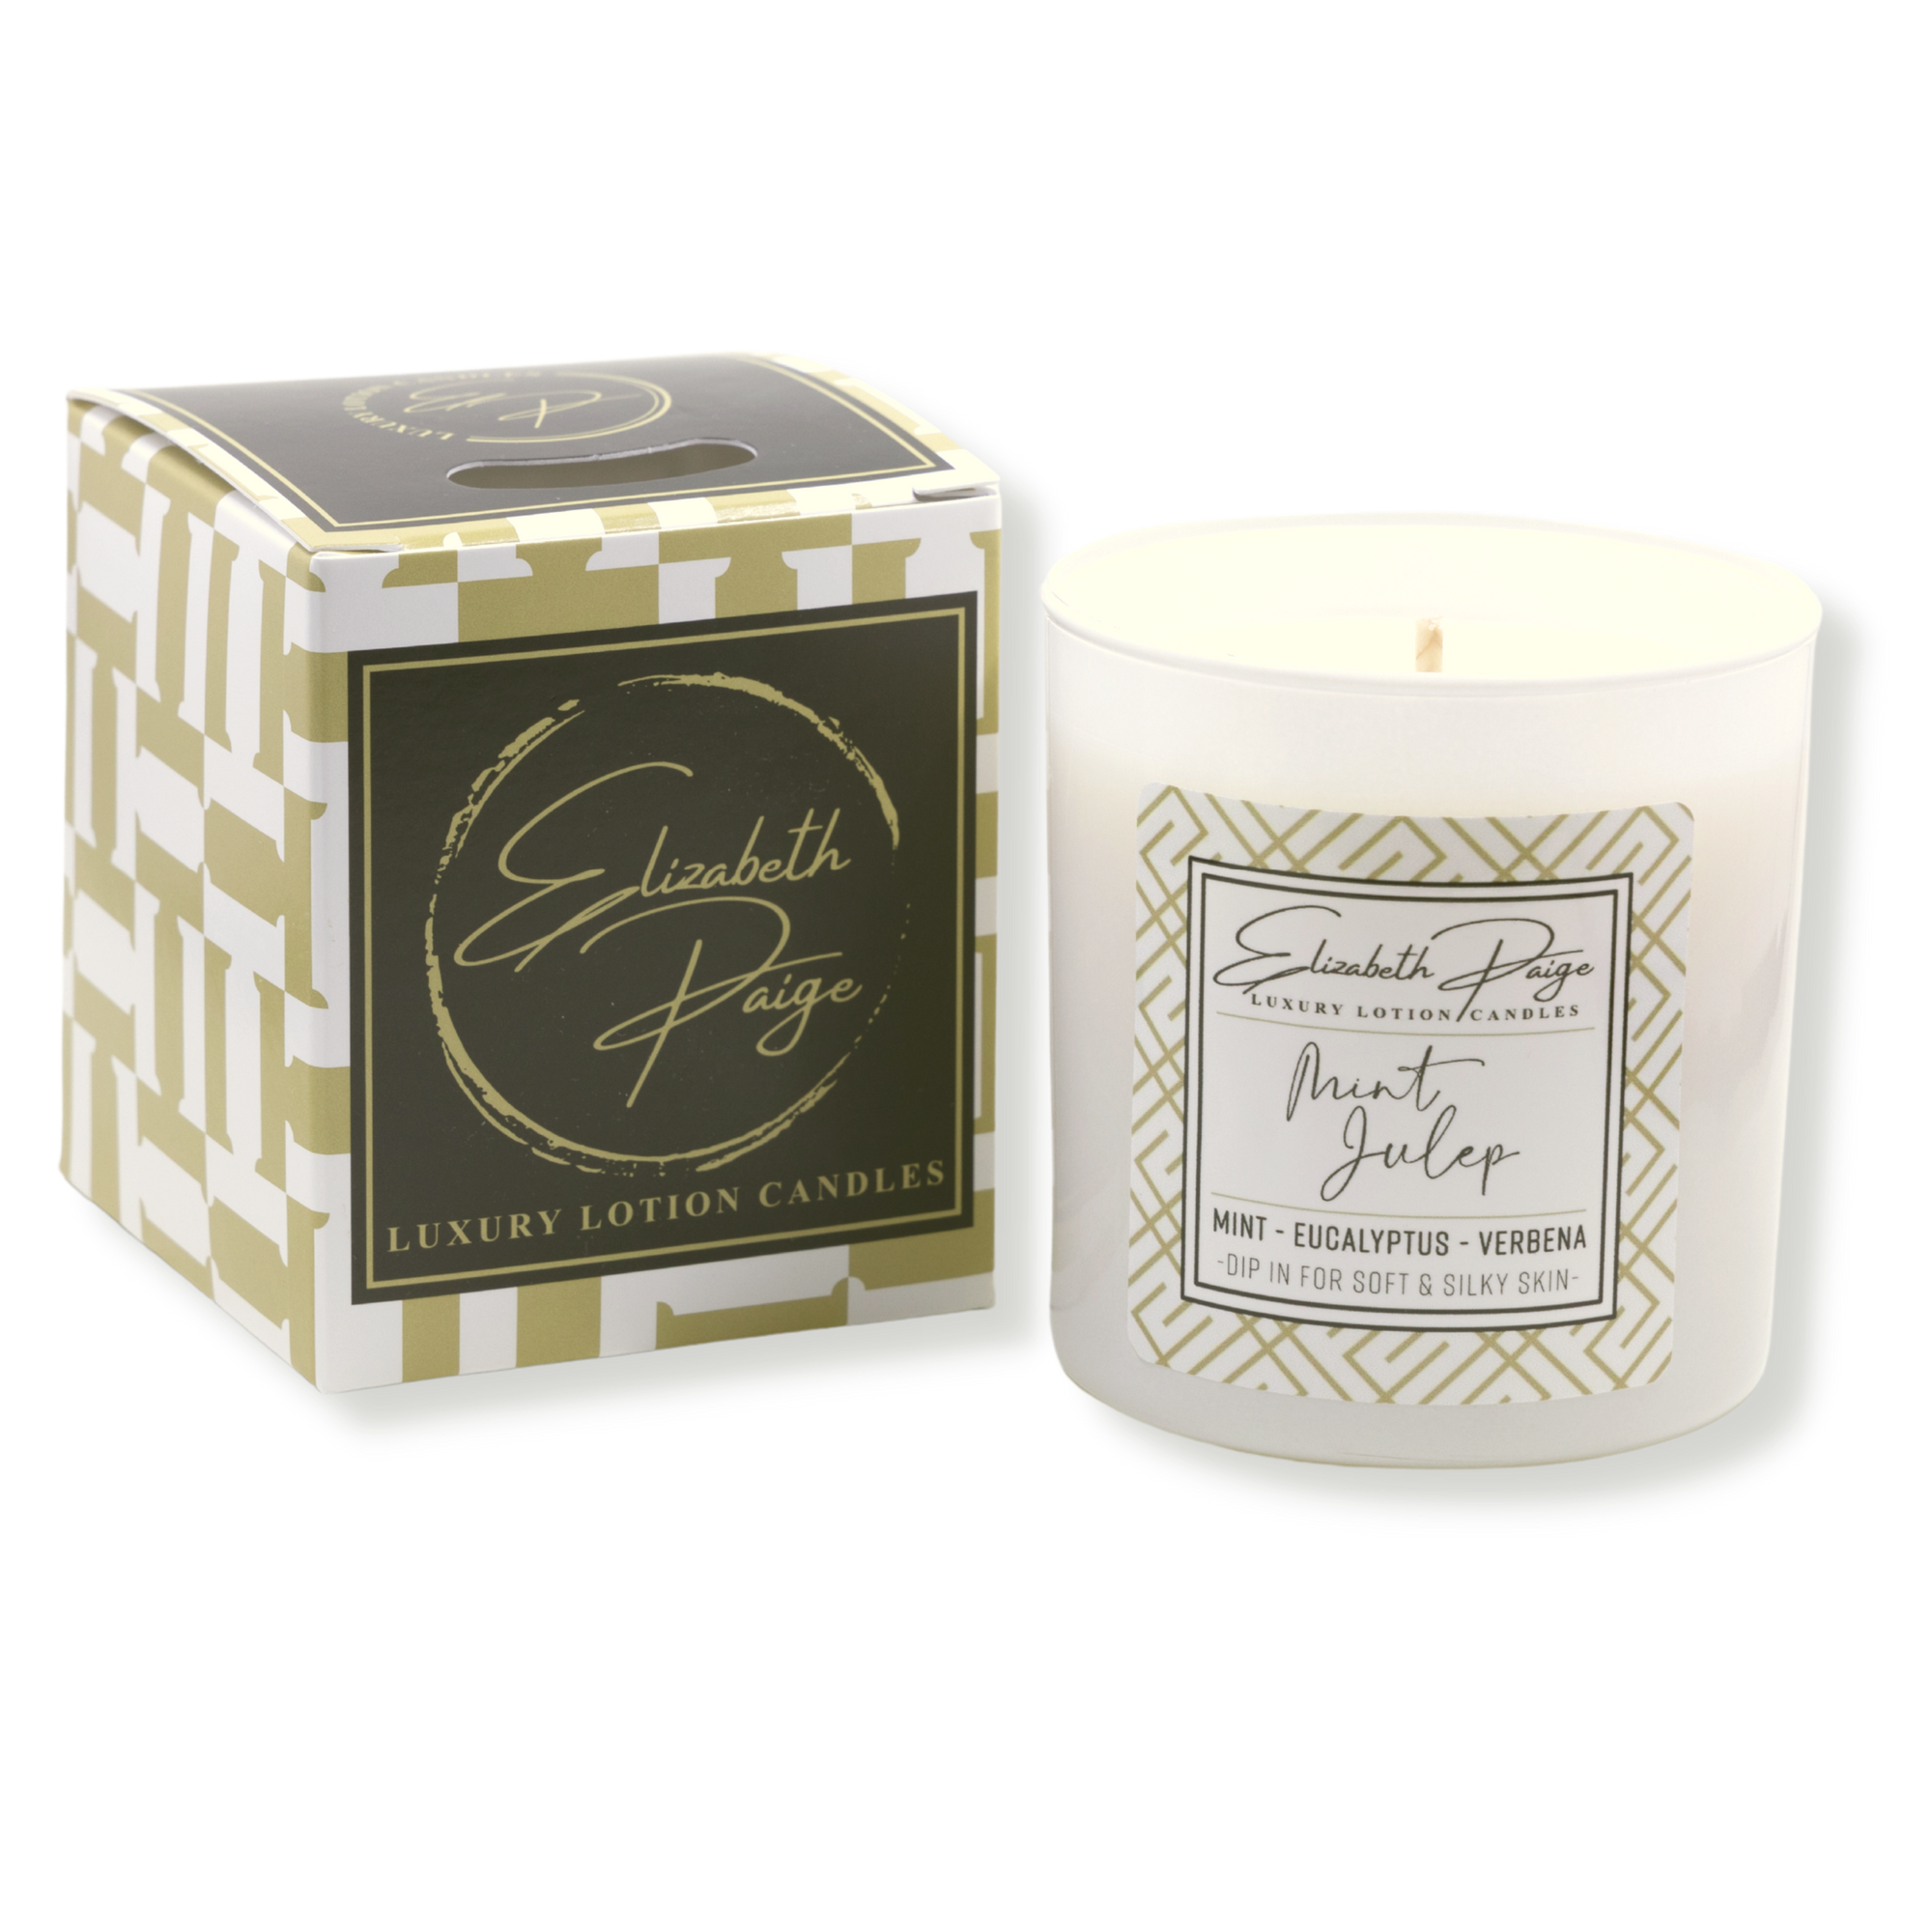 Mint Julep Soy Lotion Candle